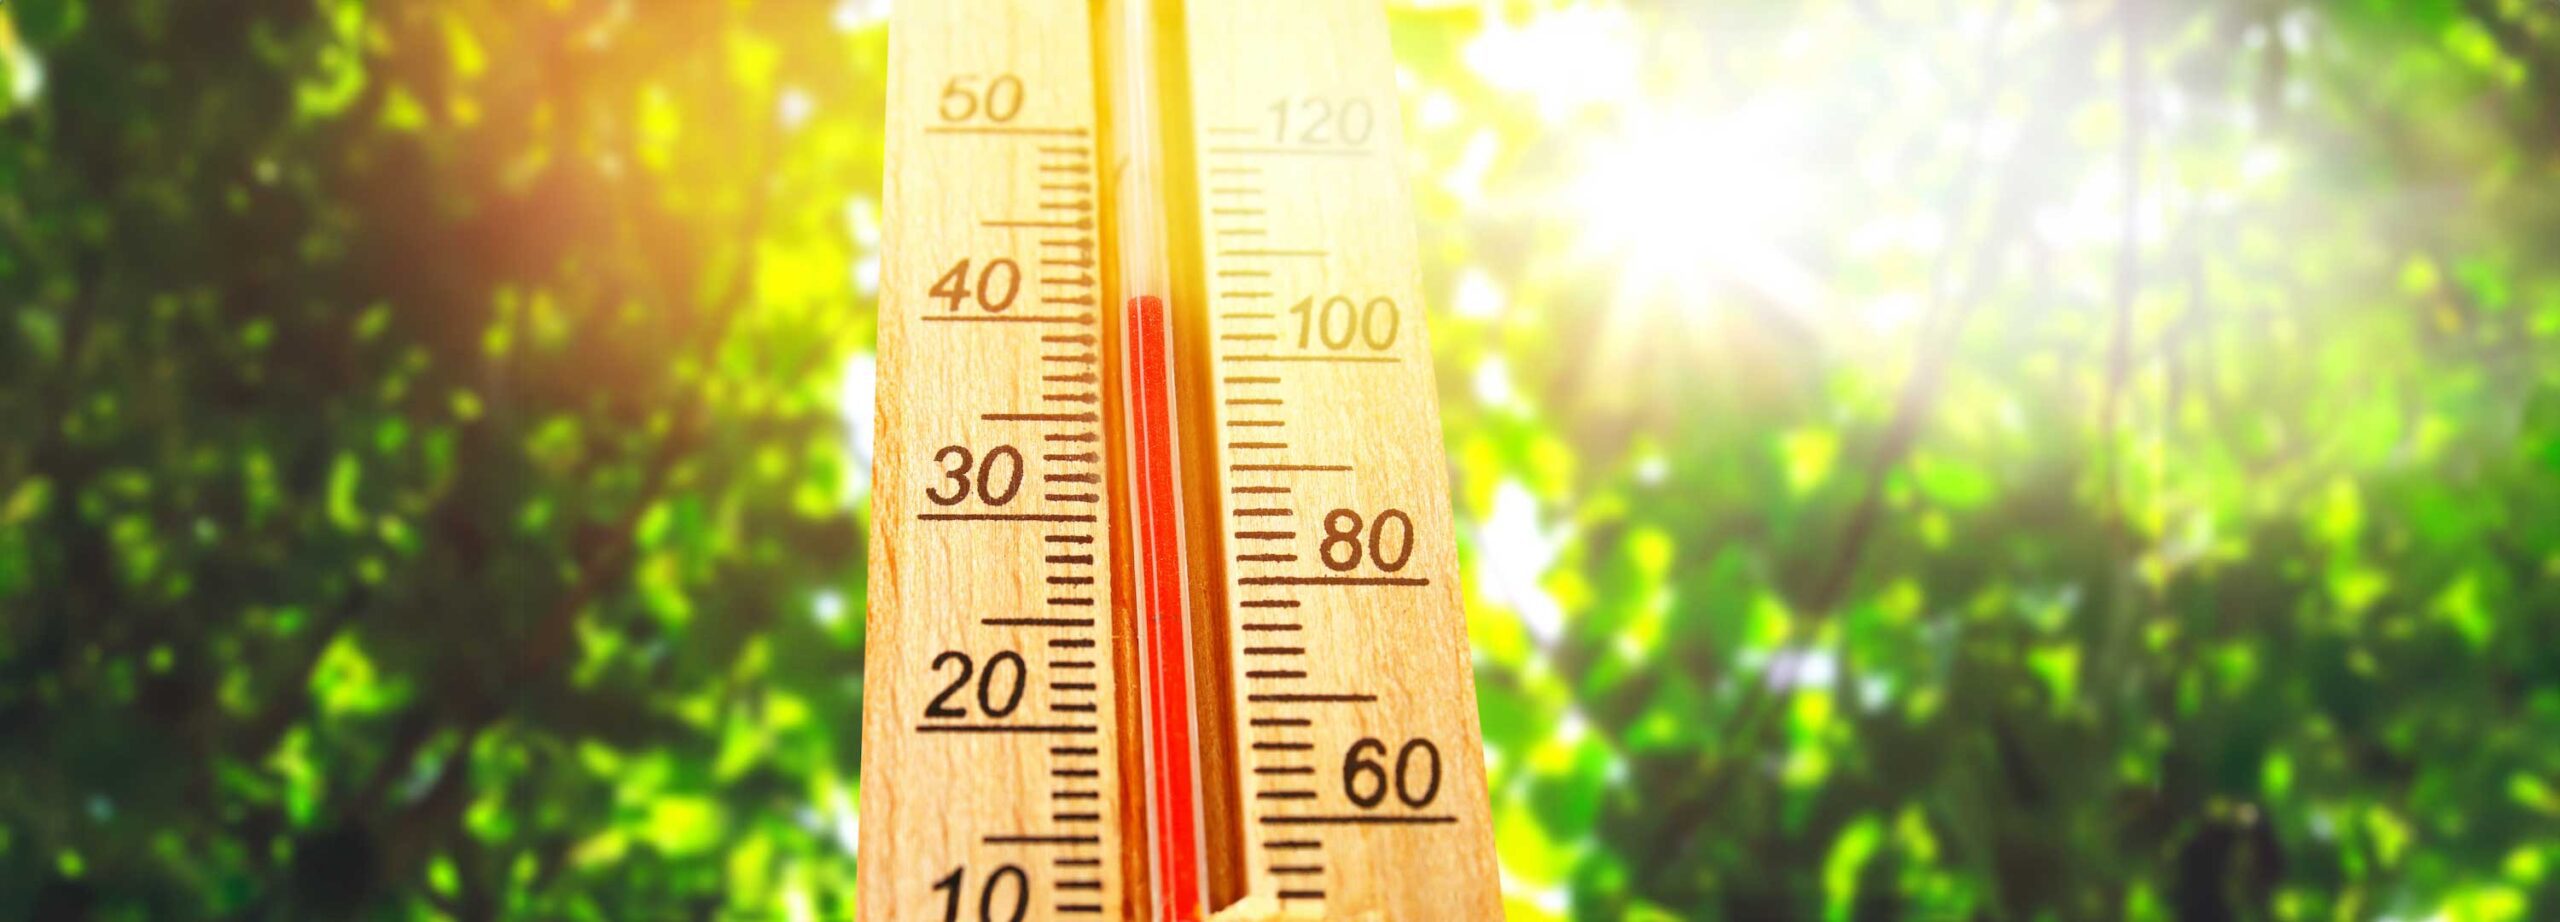 Thermometer displaying high 40 degree hot temperatures in sun summer day.